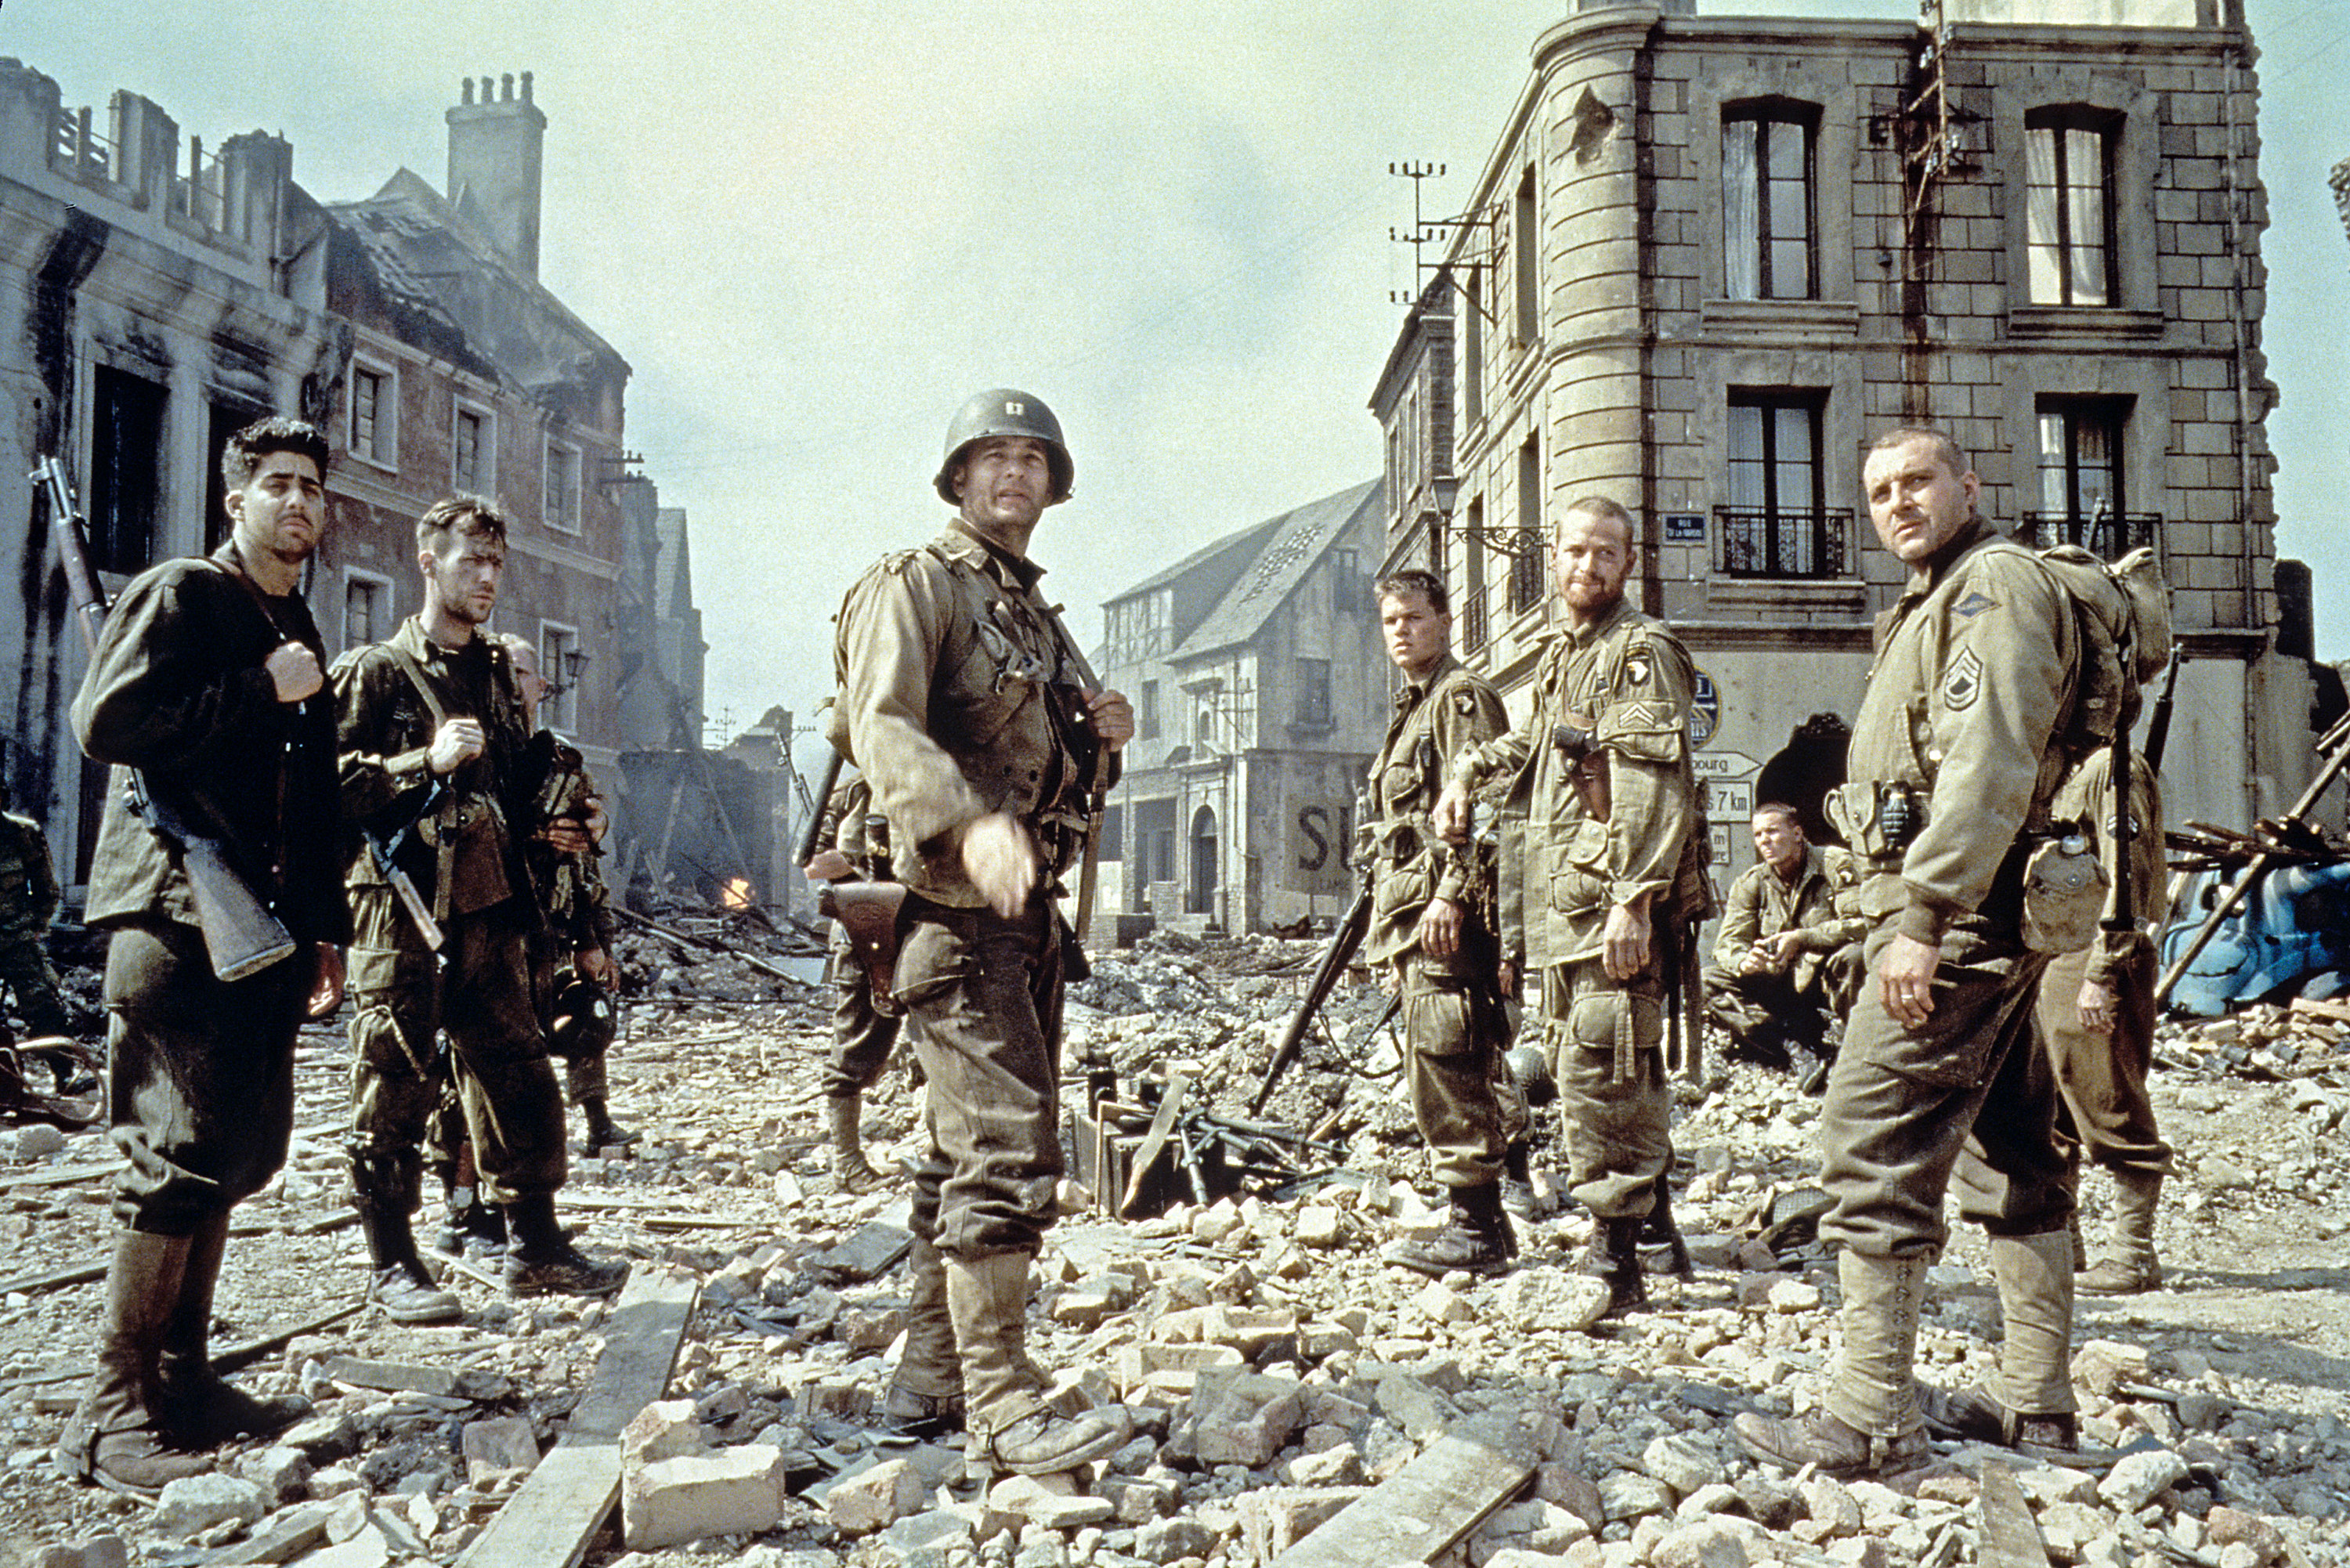 Men in military uniform standing amid rubble